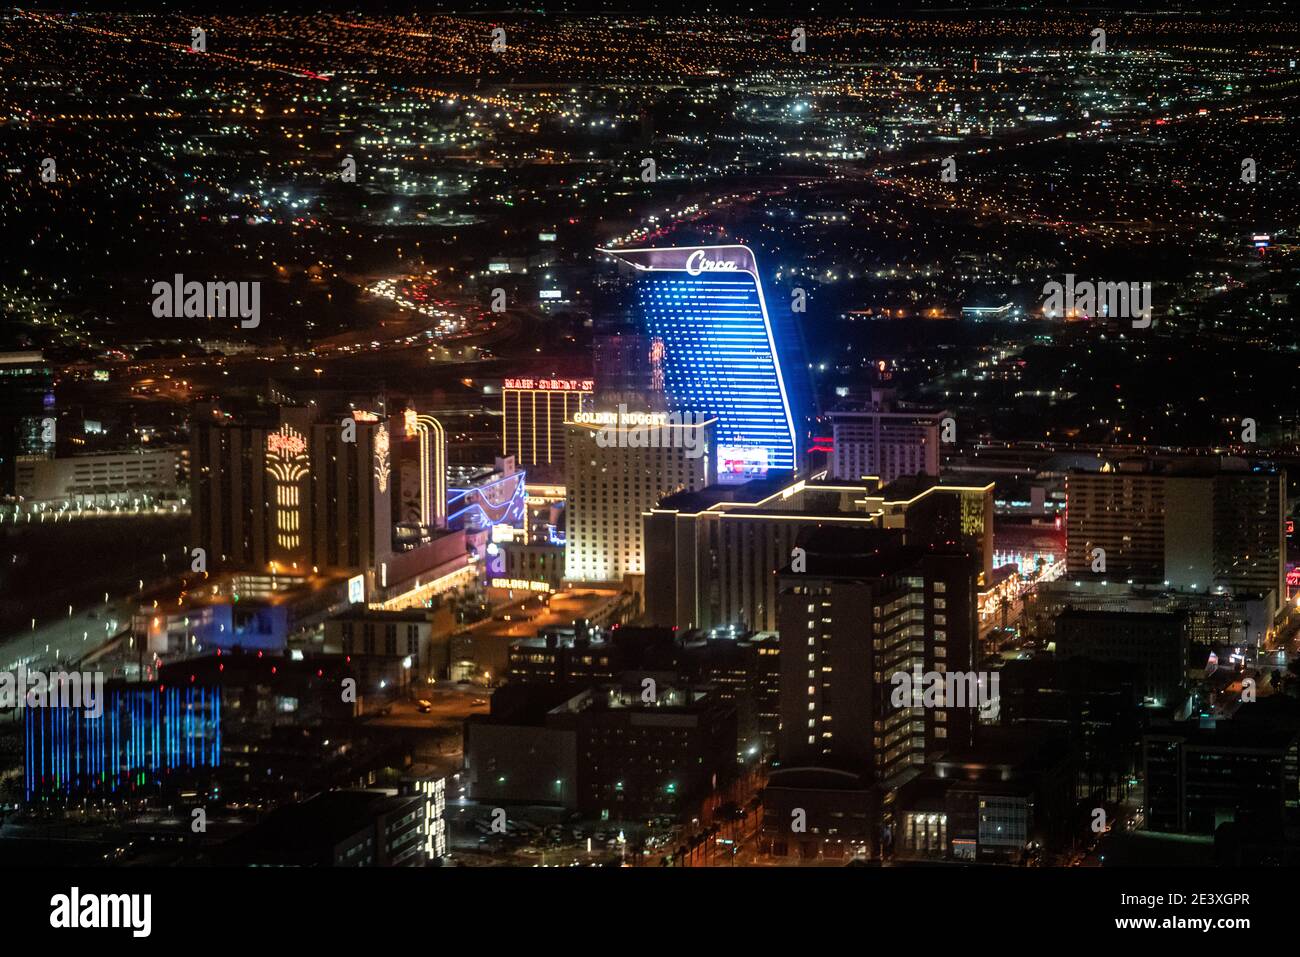 Circa, Las Vegas' newest resort and casino, and first adults-only resort in Vegas is seen from a helicopter behind the famous Freemont Street. Stock Photo